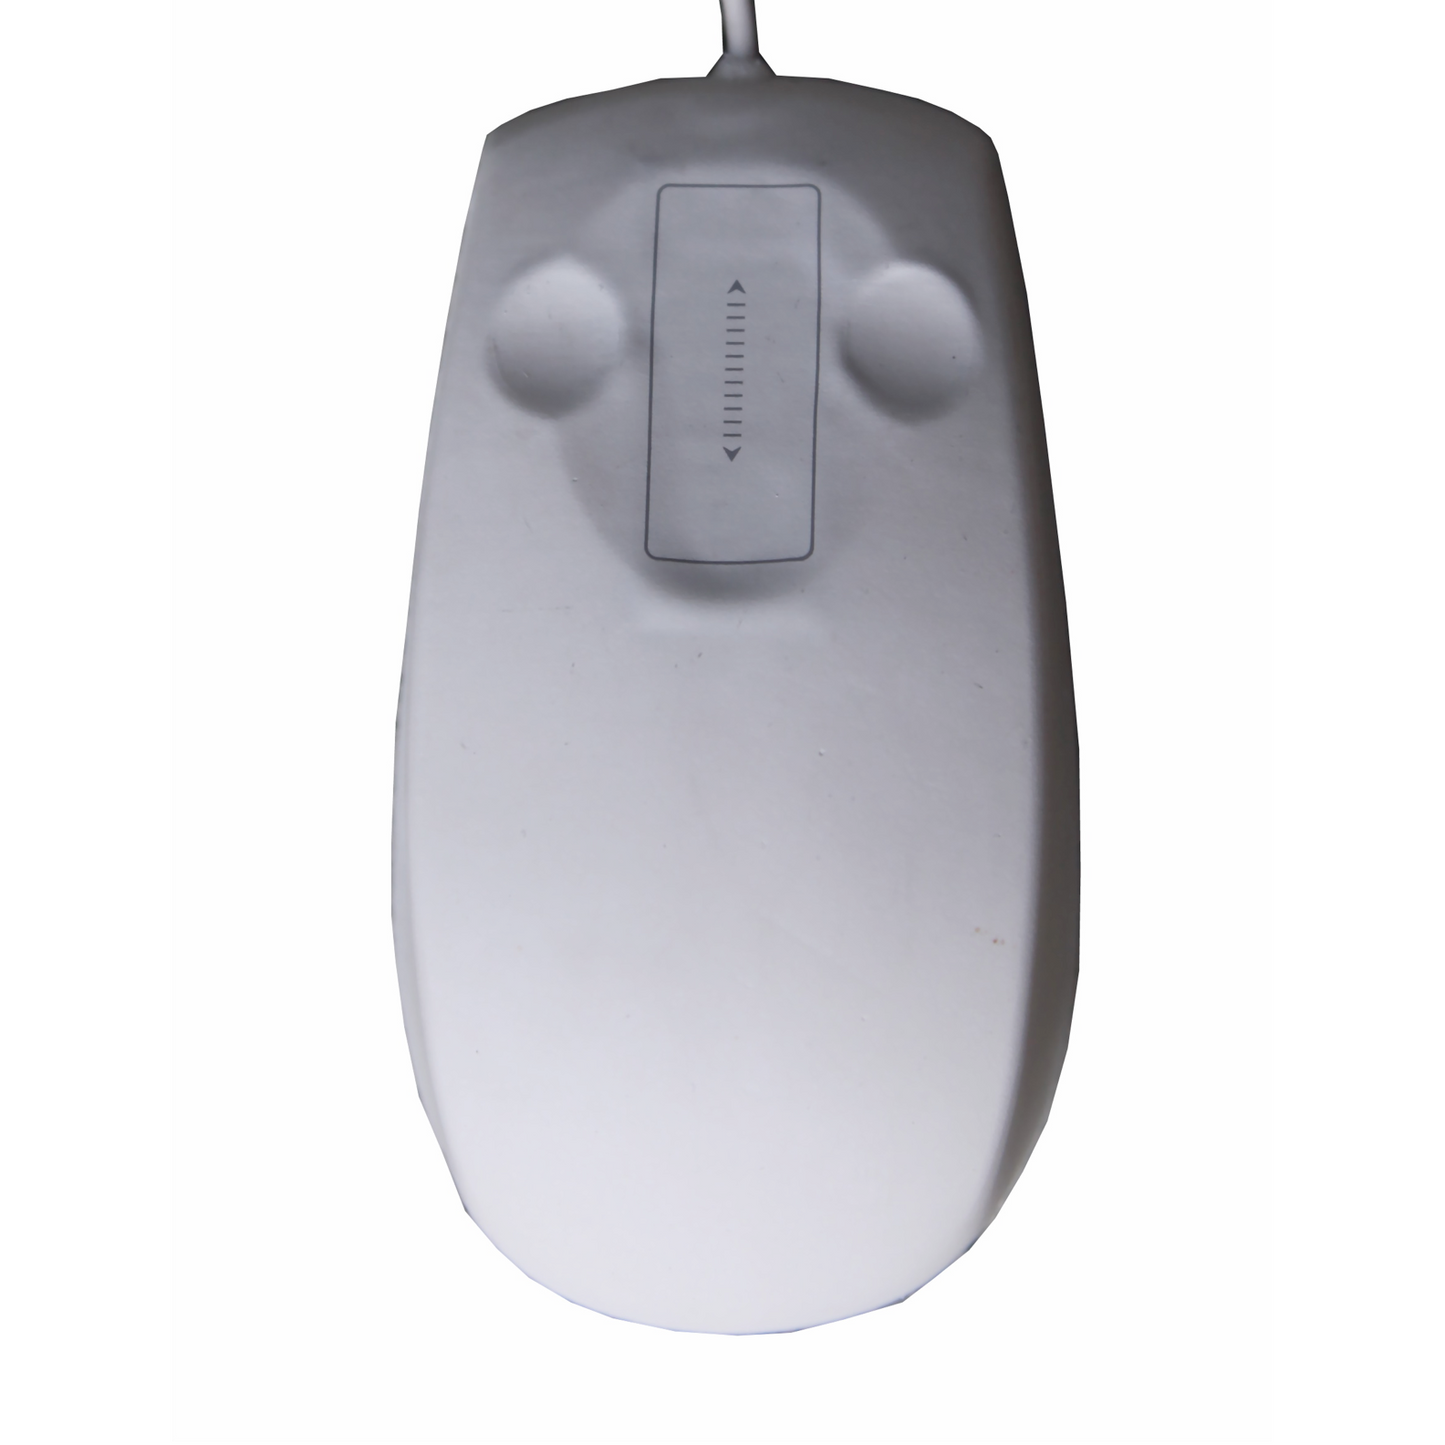 AS-M102 Waterproof Optical Mouse with Scrolling Touchpad